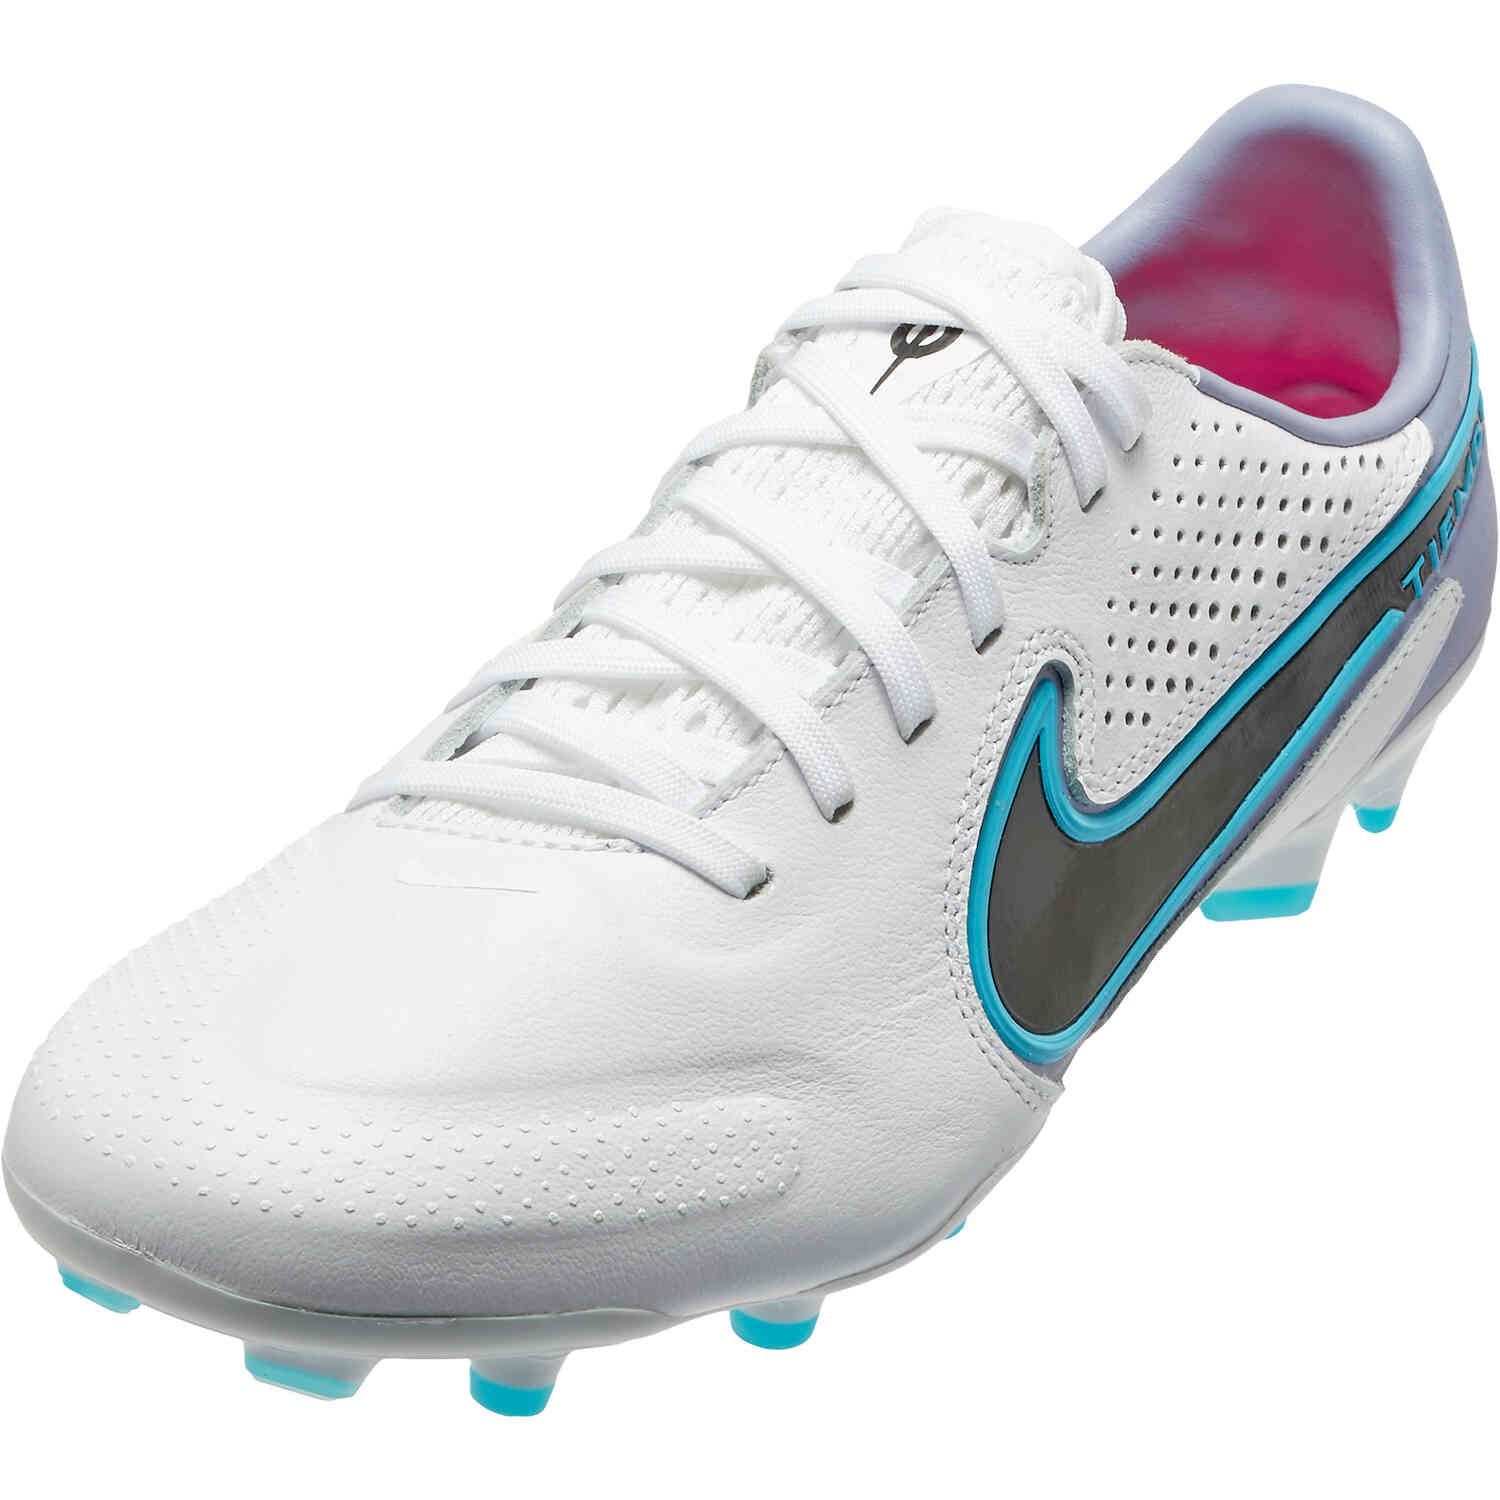 Nike Tiempo Legend 9 Pro FG Firm Soccer Cleats - White, Baltic Blue & Pink Blast - Soccer Master